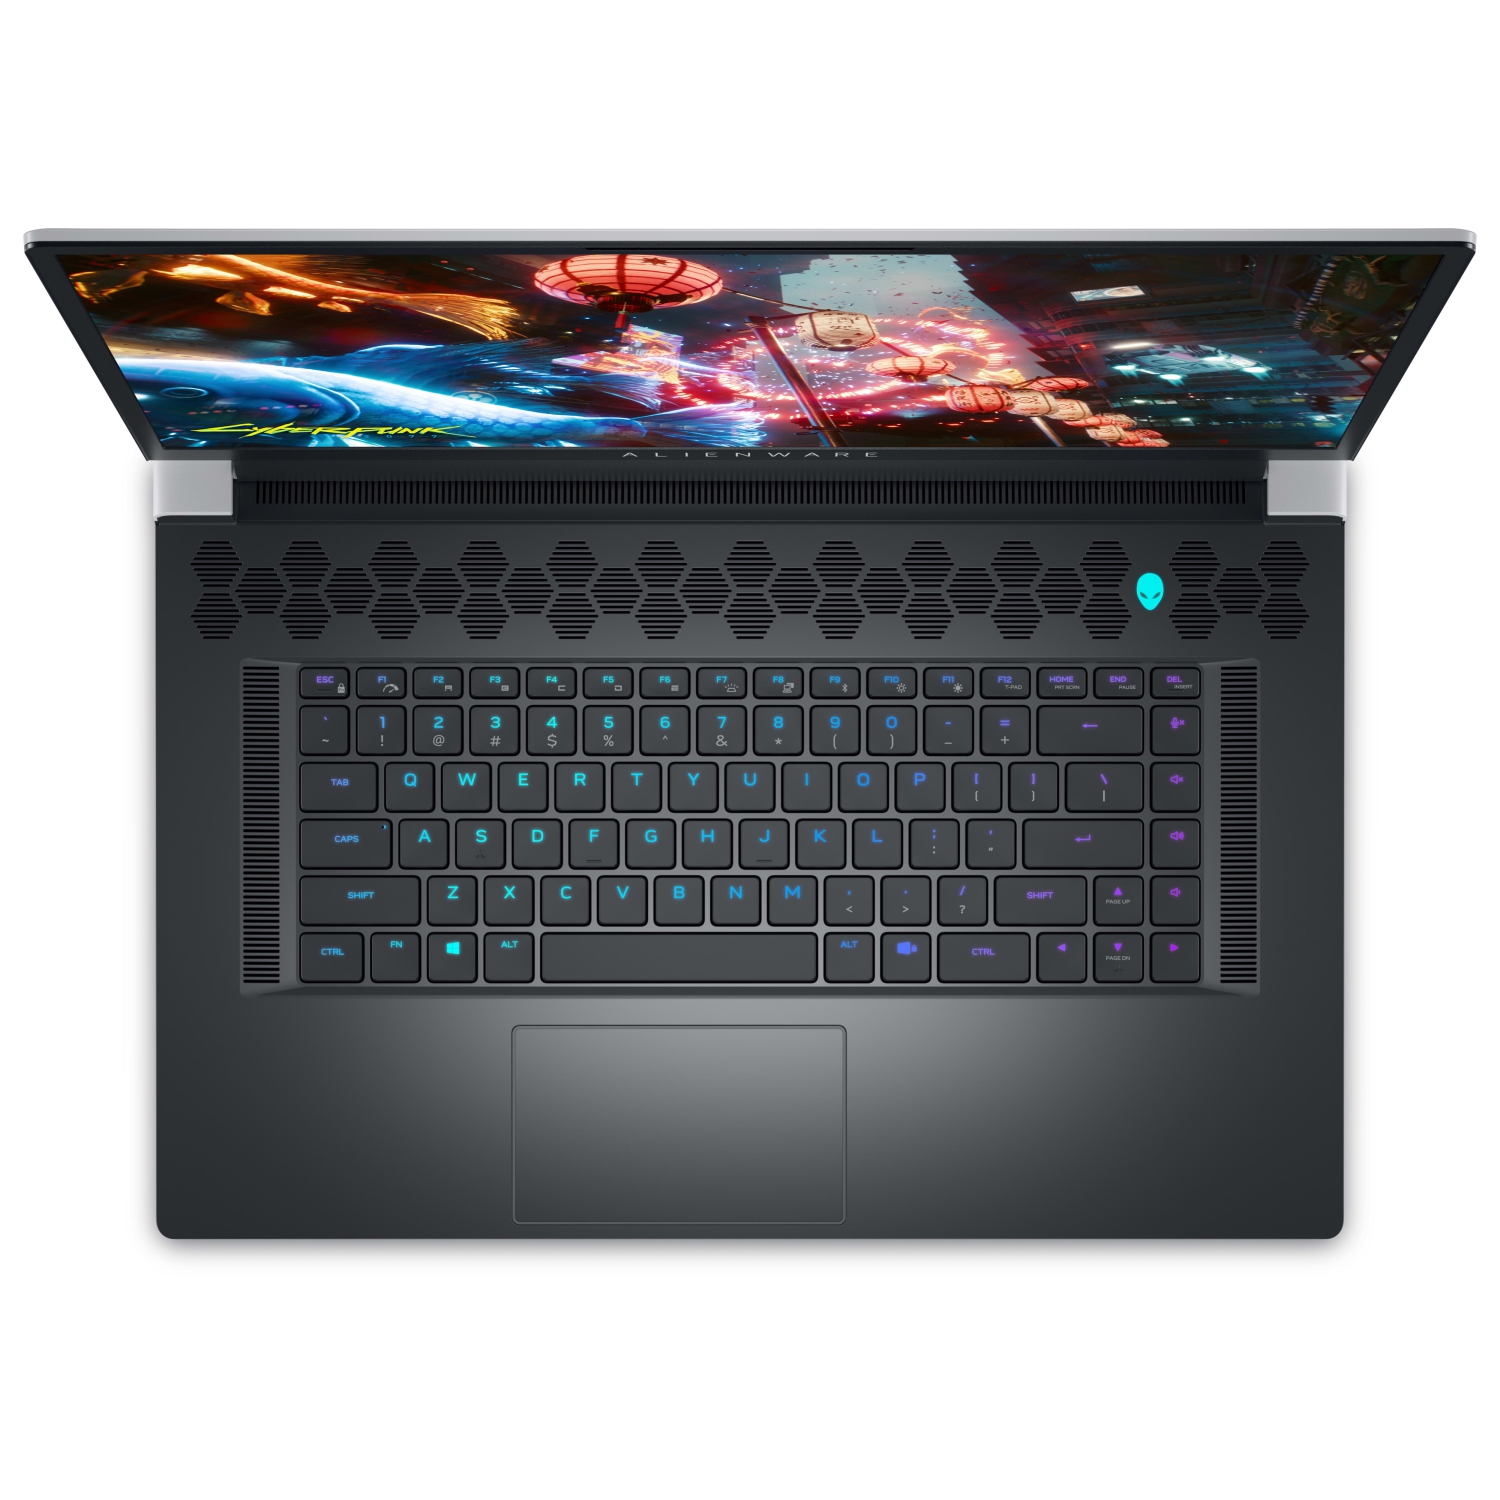 Refurbished (Excellent) – Dell Alienware X17 R2 Gaming Laptop (2022) | 17.3" FHD | Core i7 - 512GB SSD - 64GB RAM - 3080 Ti | 14 Cores @ 4.7 GHz - 12th Gen CPU - 16GB GDDR6X